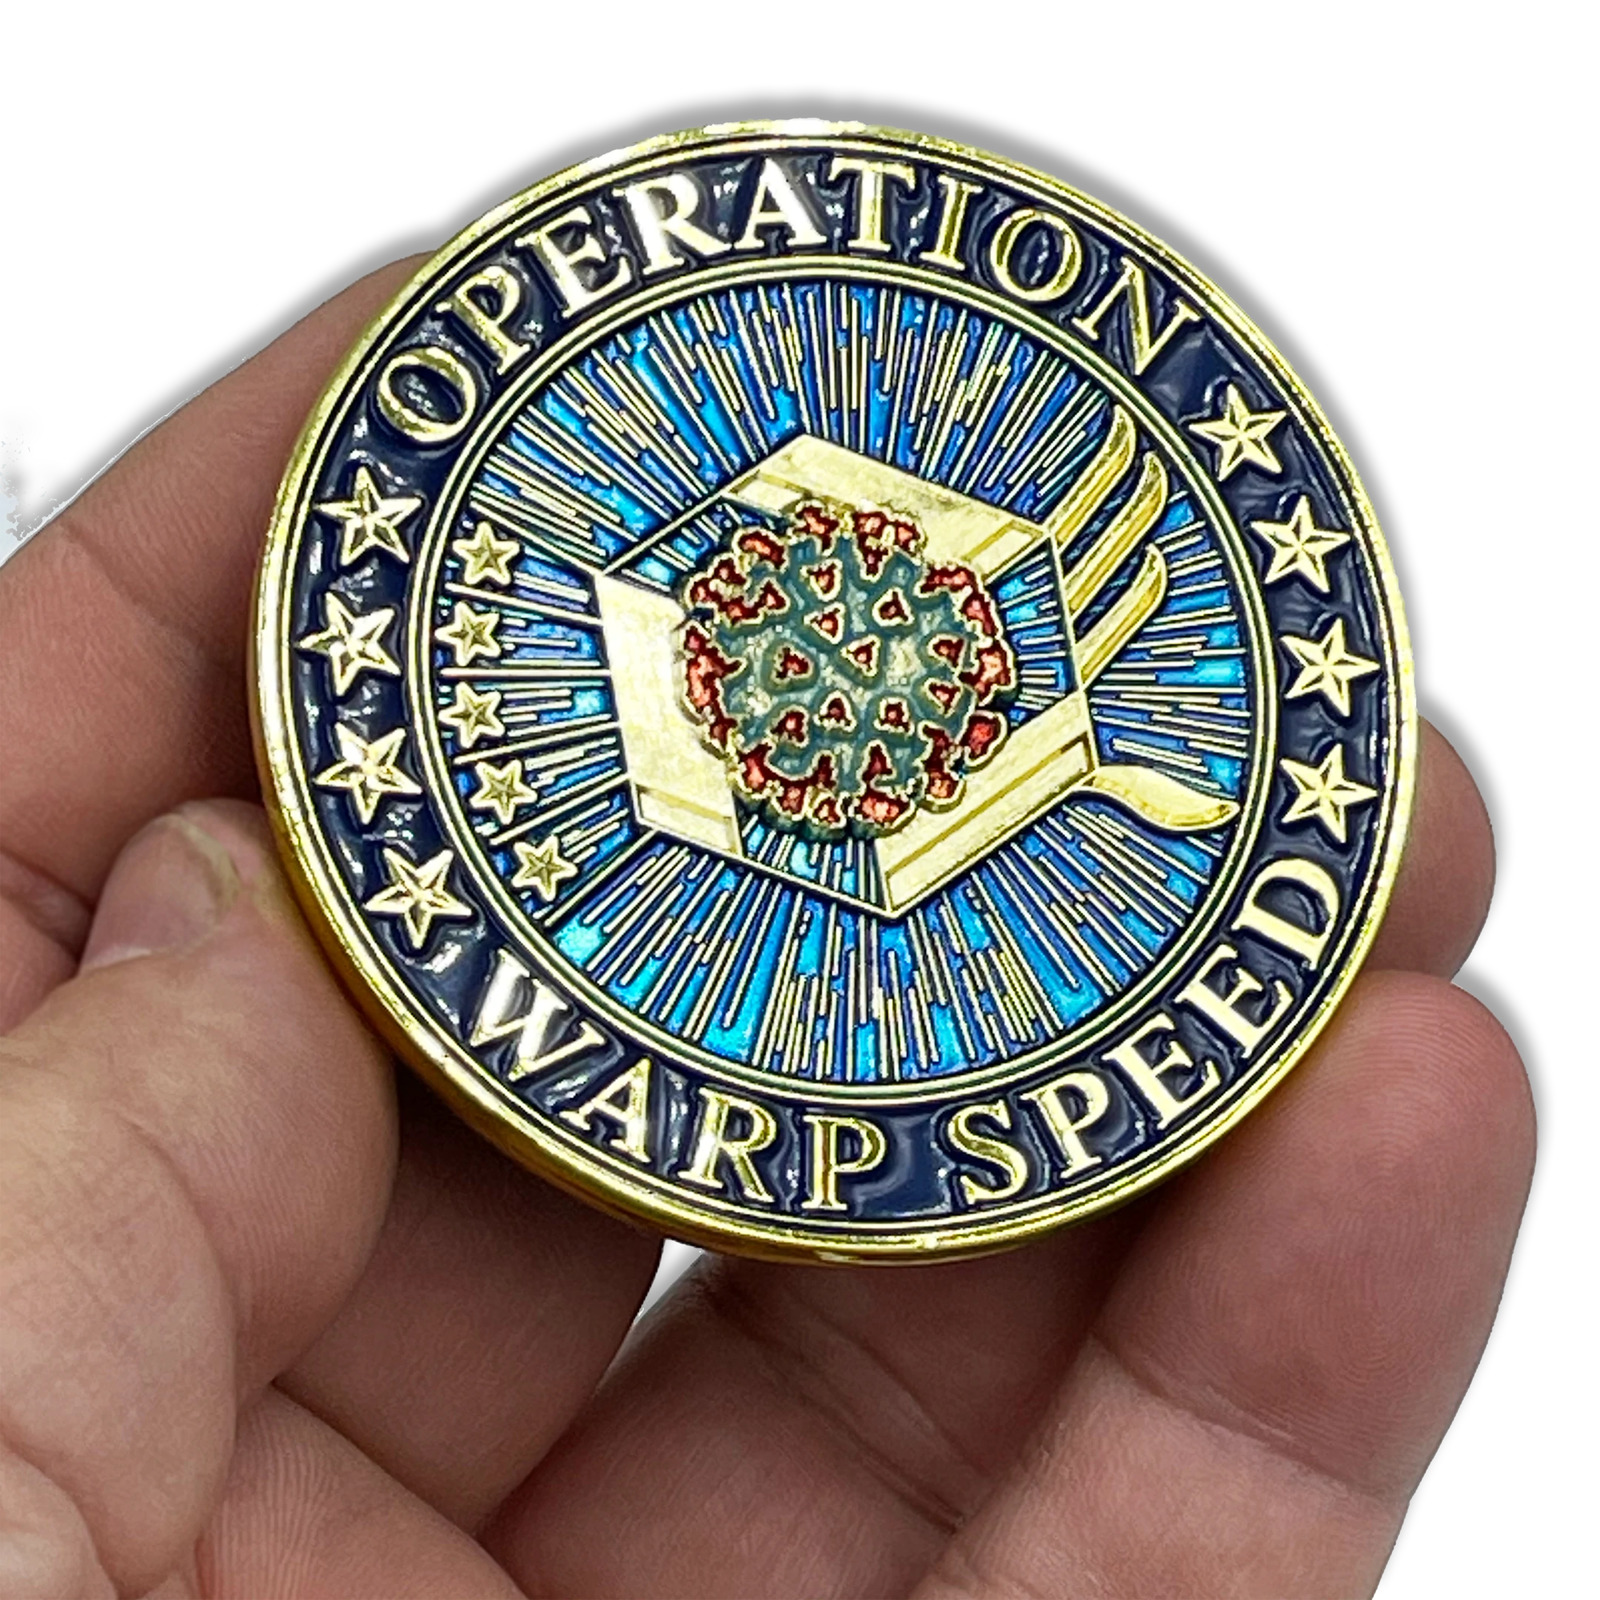 EL4-009 Operation Warp Speed Challenge Coin Covid-19 Vaccine Task Force Departme